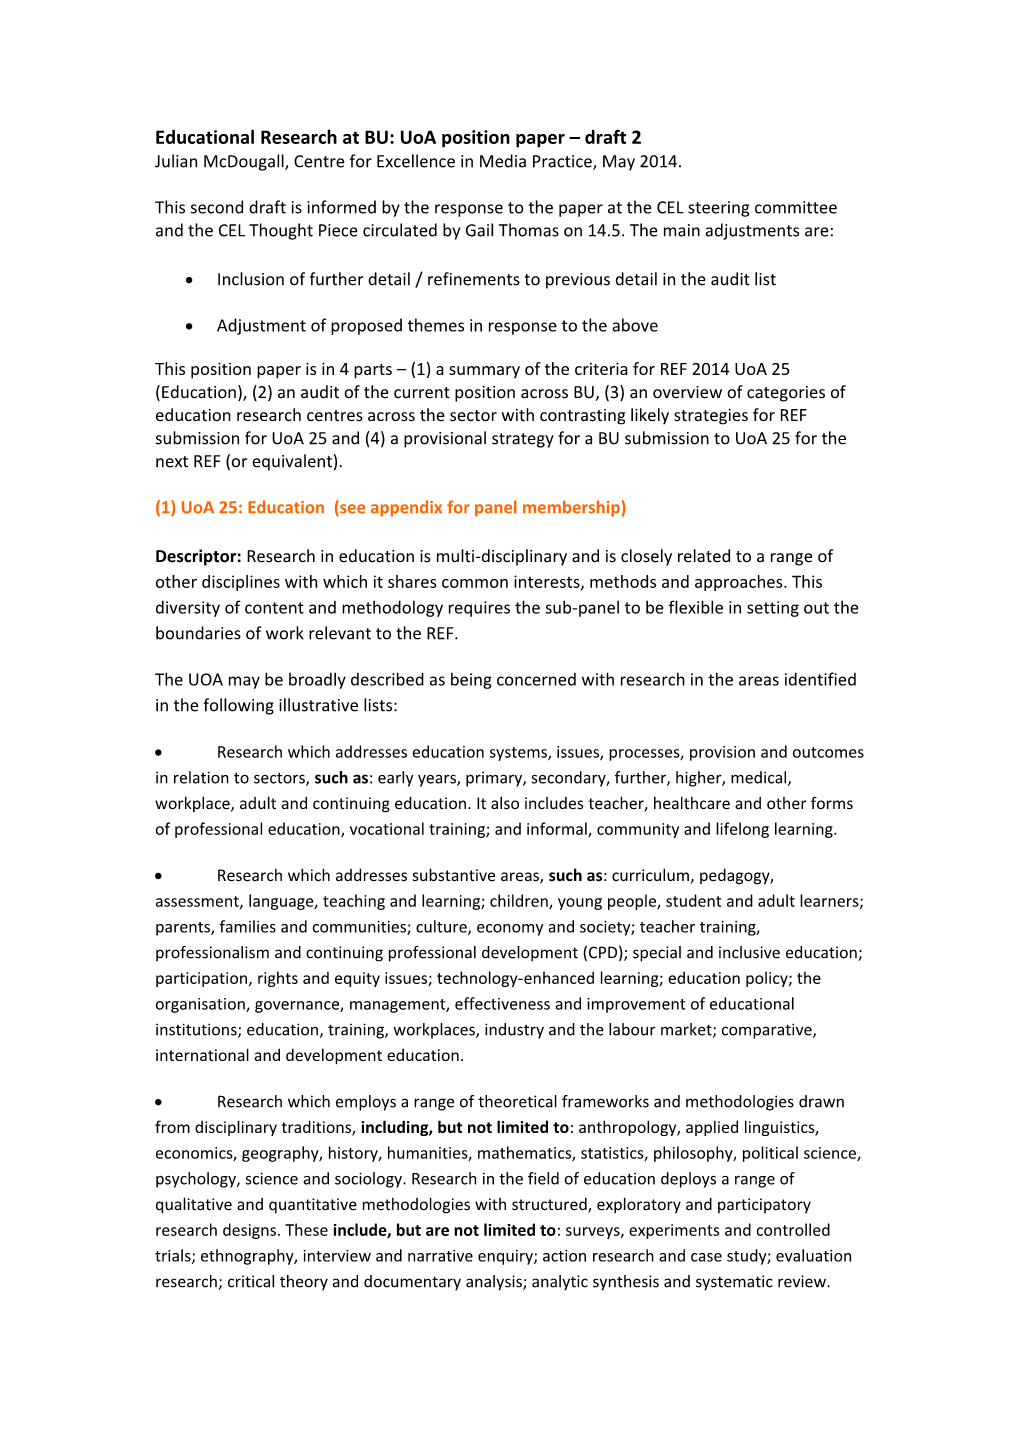 Educational Research at BU: Uoa Position Paper Draft 2